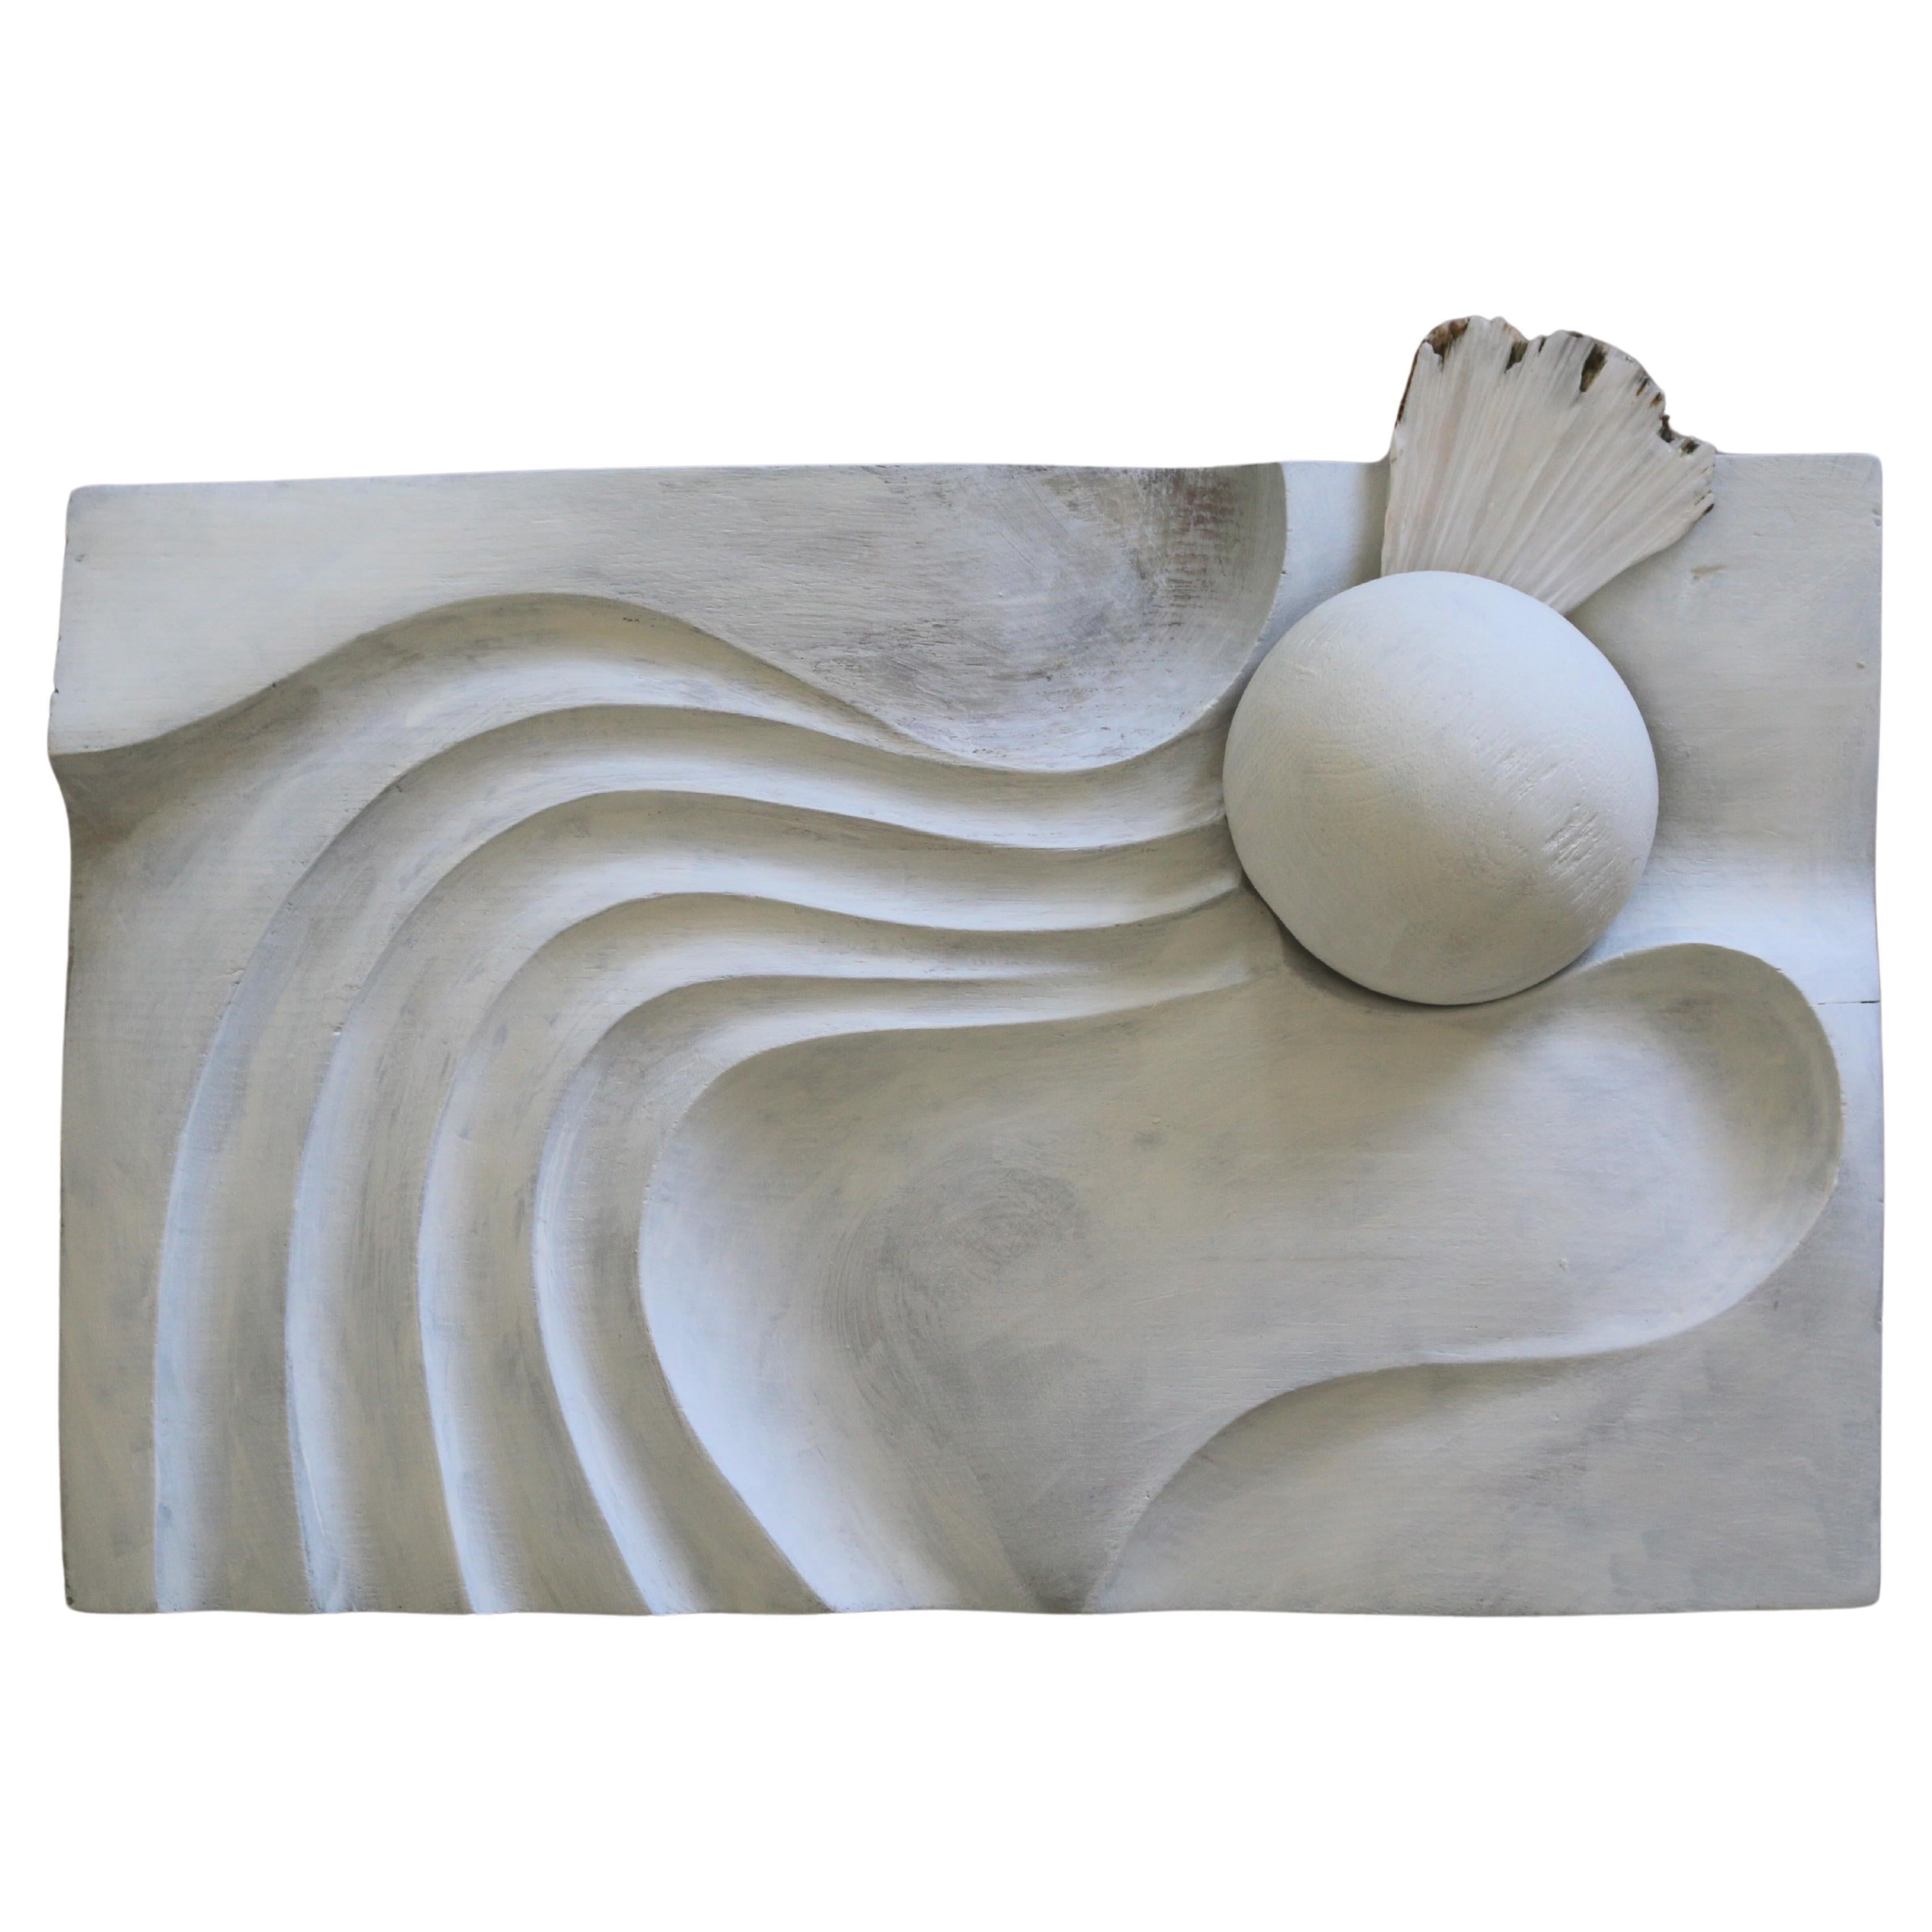 RE:04 White wood sculptural collage wall art For Sale